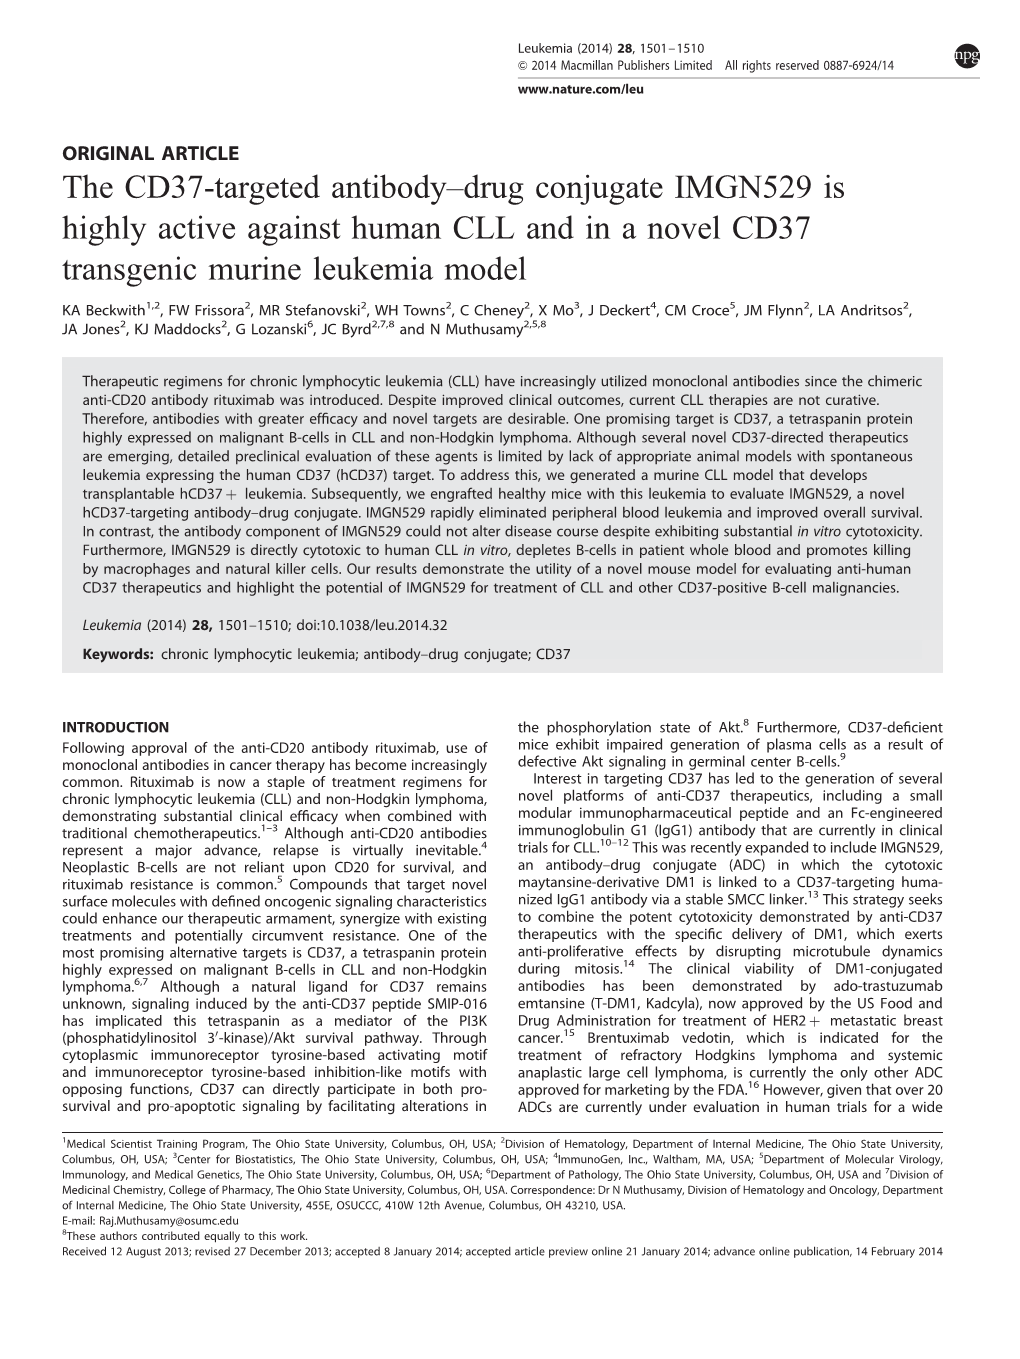 The CD37-Targeted Antibody–Drug Conjugate IMGN529 Is Highly Active Against Human CLL and in a Novel CD37 Transgenic Murine Leukemia Model